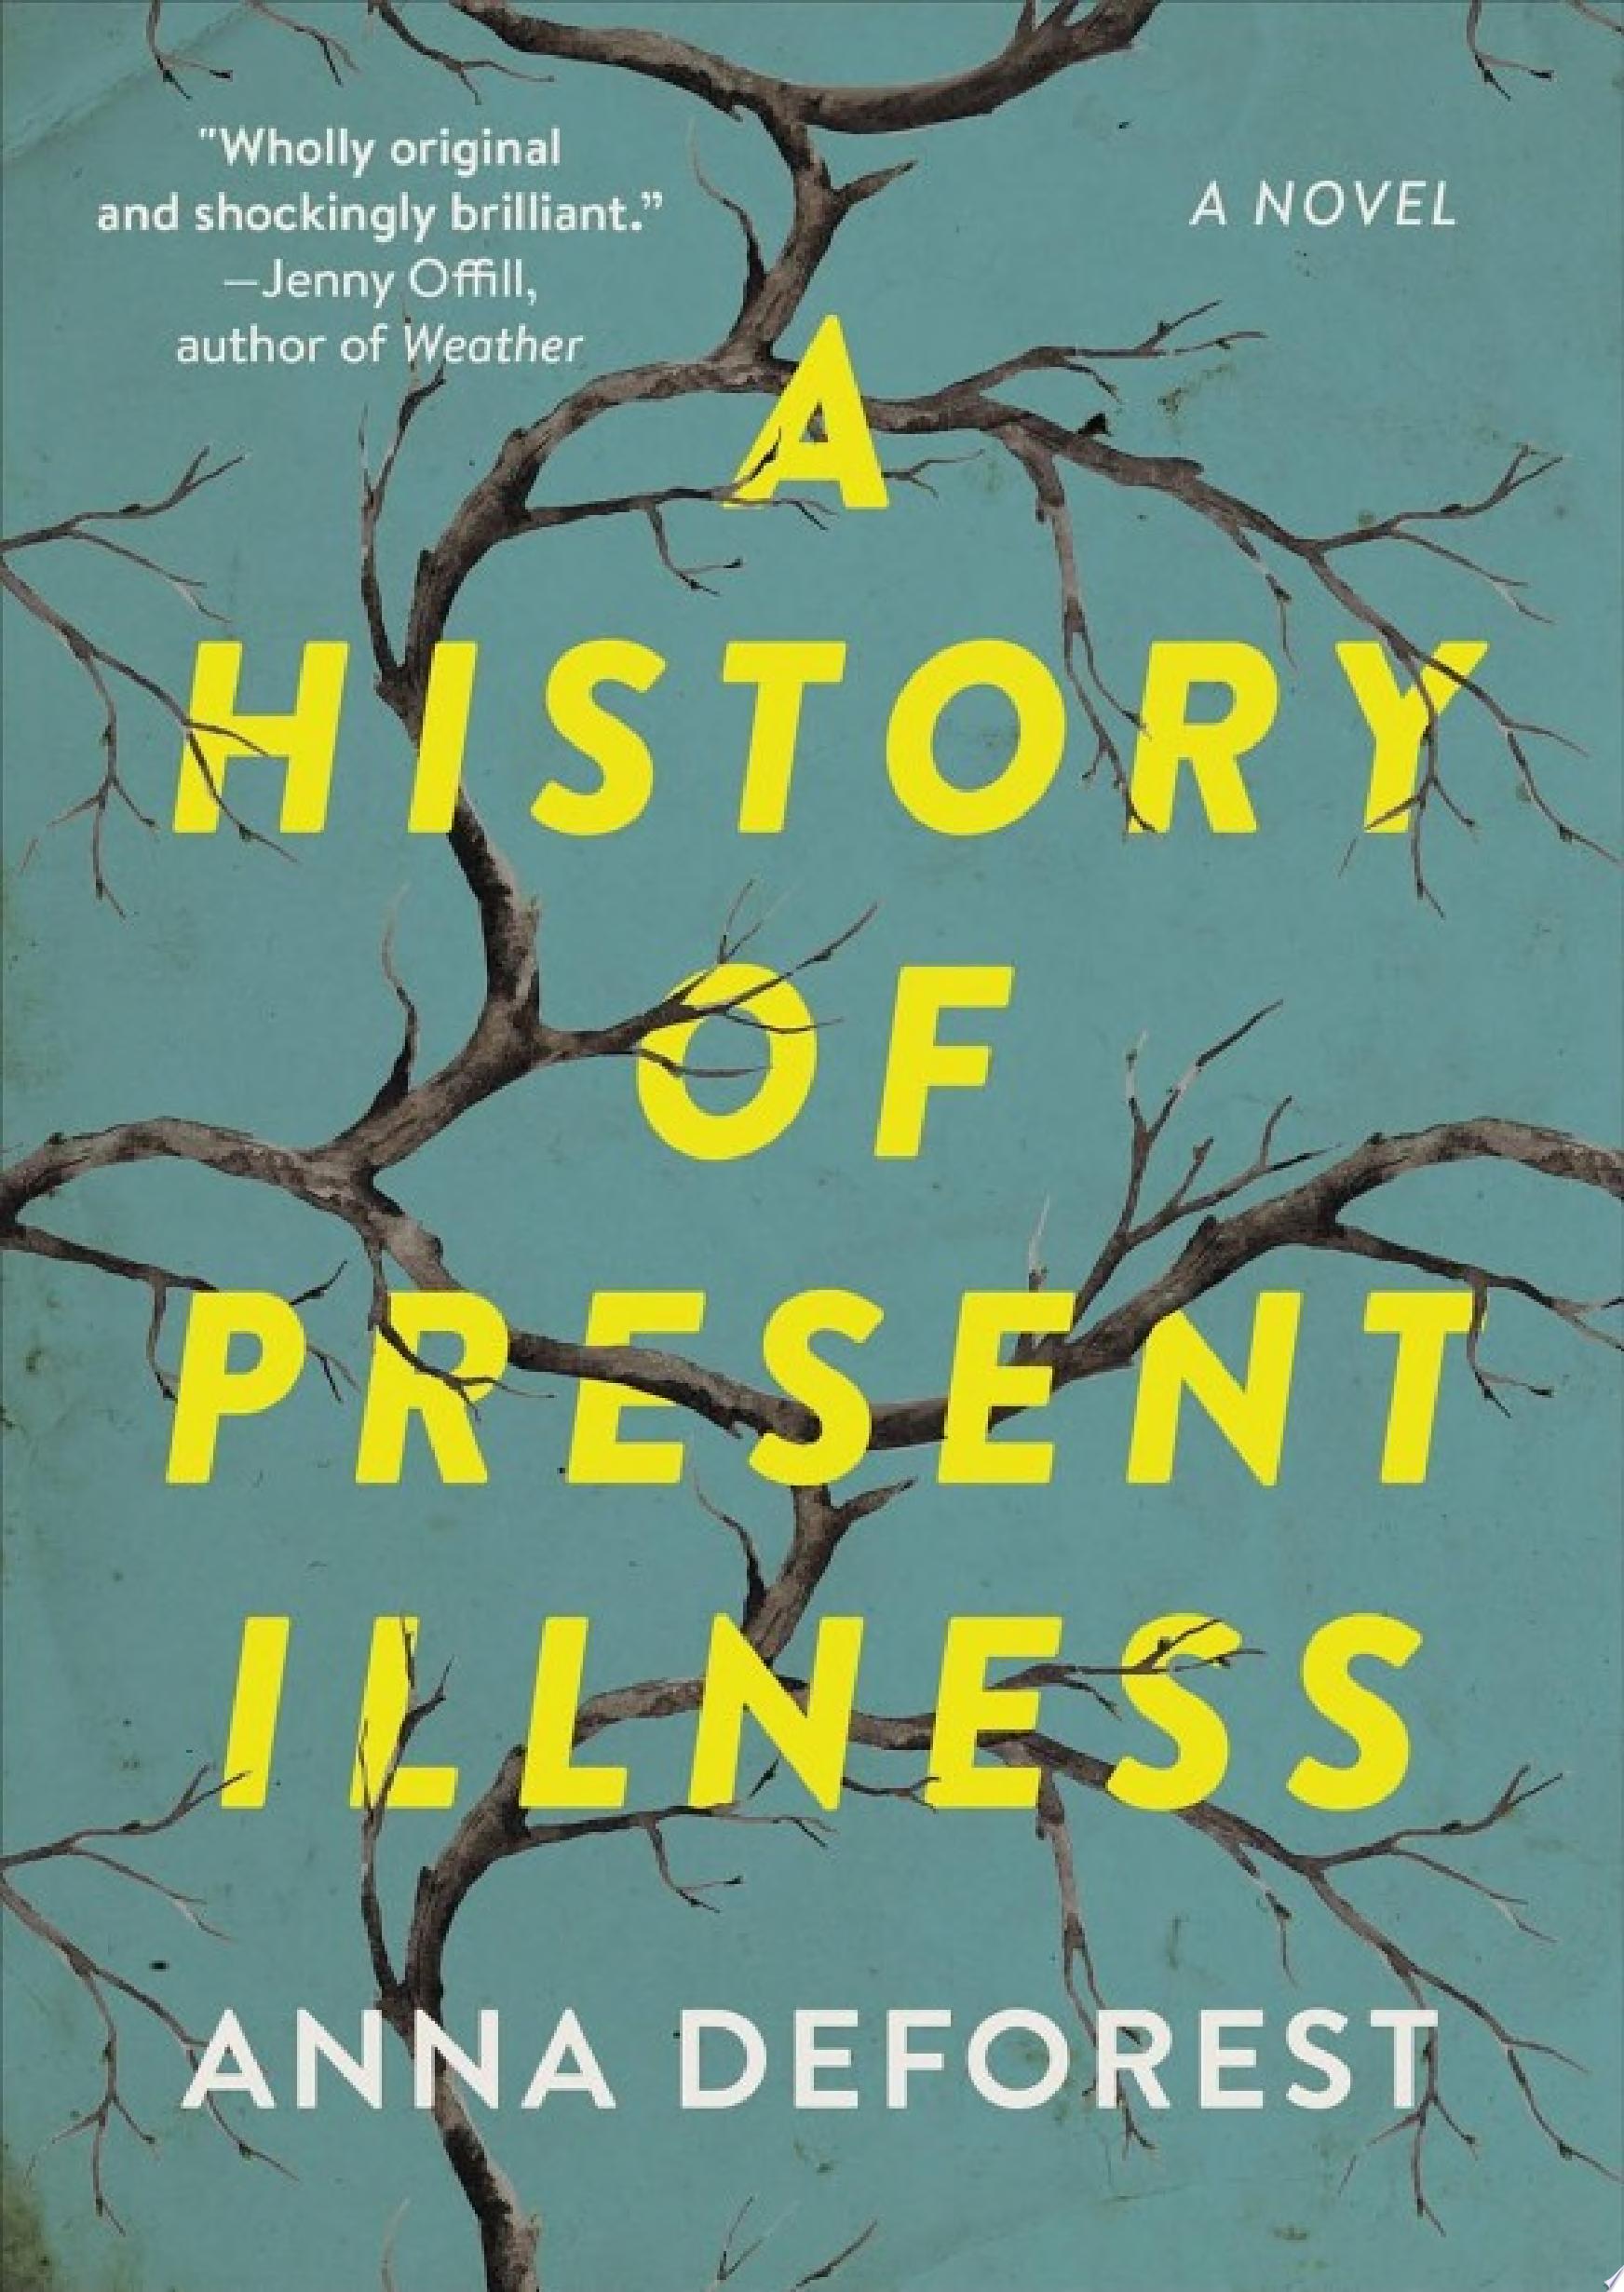 Image for "A History of Present Illness"